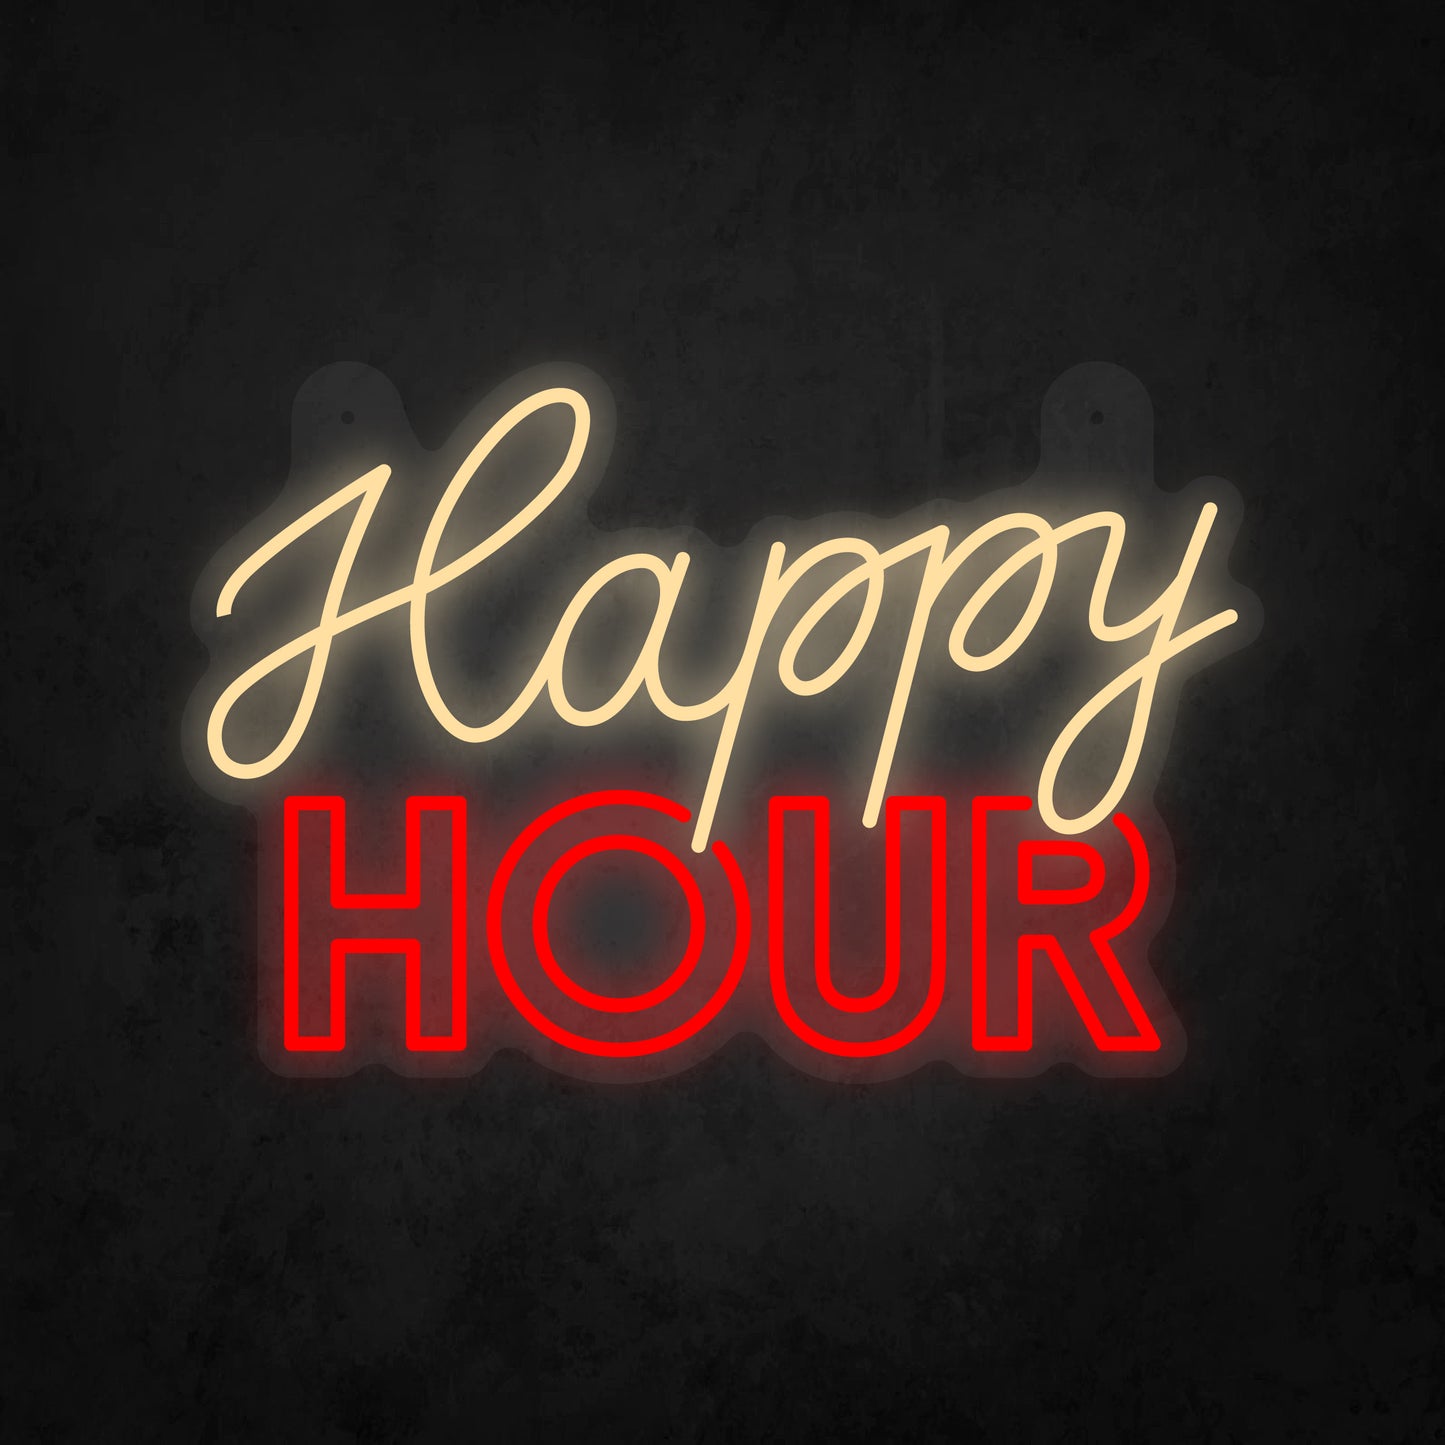 LED Neon Sign - Happy Hour Sign for Window